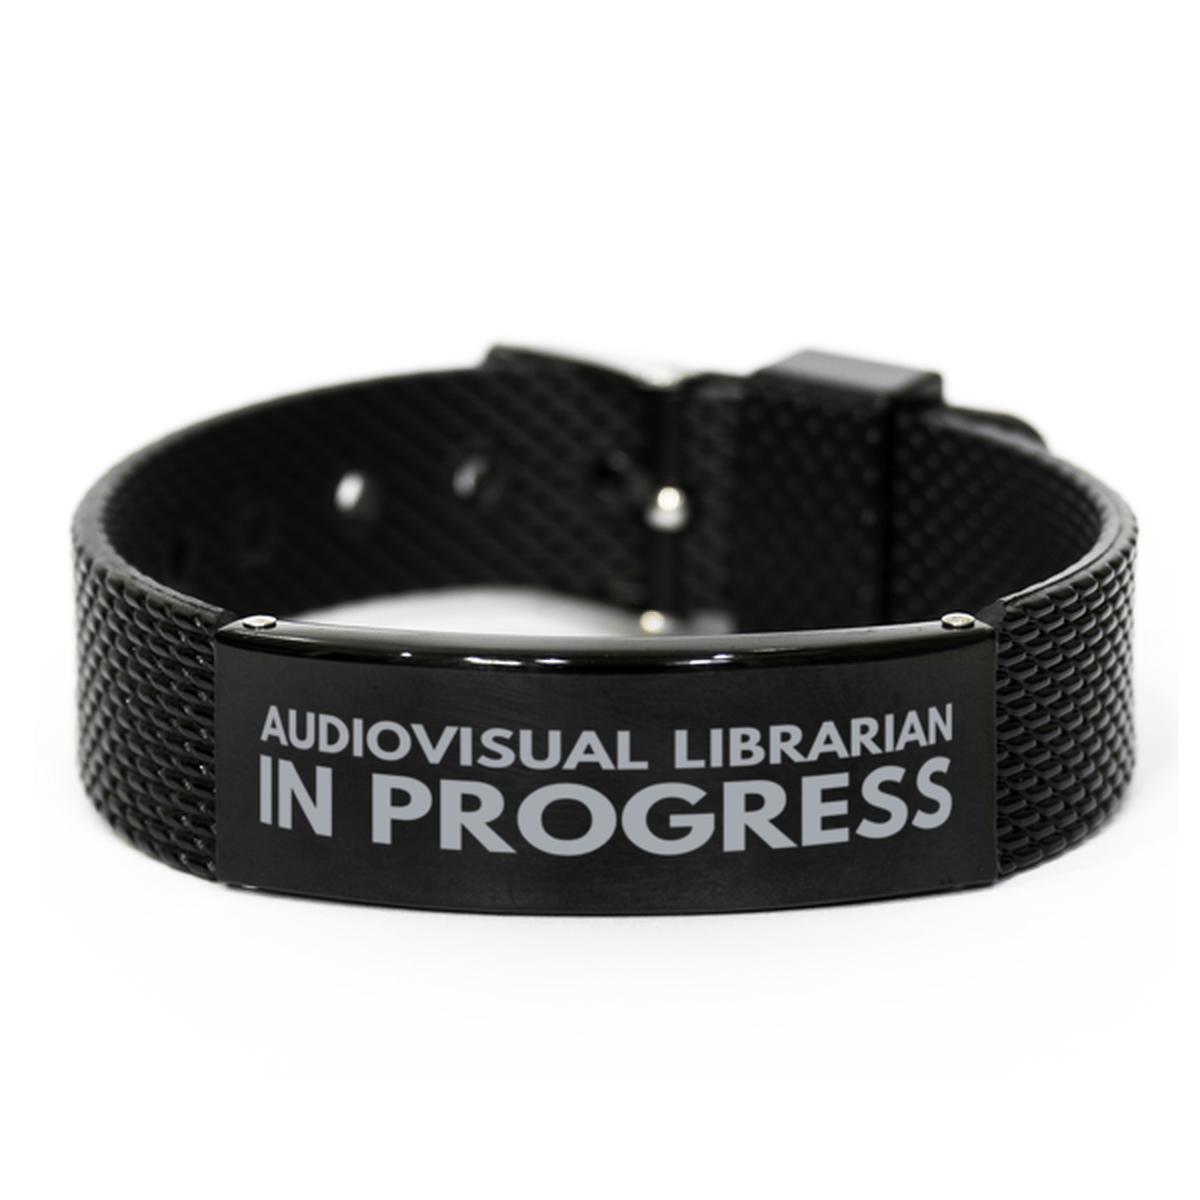 Inspirational Audiovisual Librarian Black Shark Mesh Bracelet, Audiovisual Librarian In Progress, Best Graduation Gifts for Students